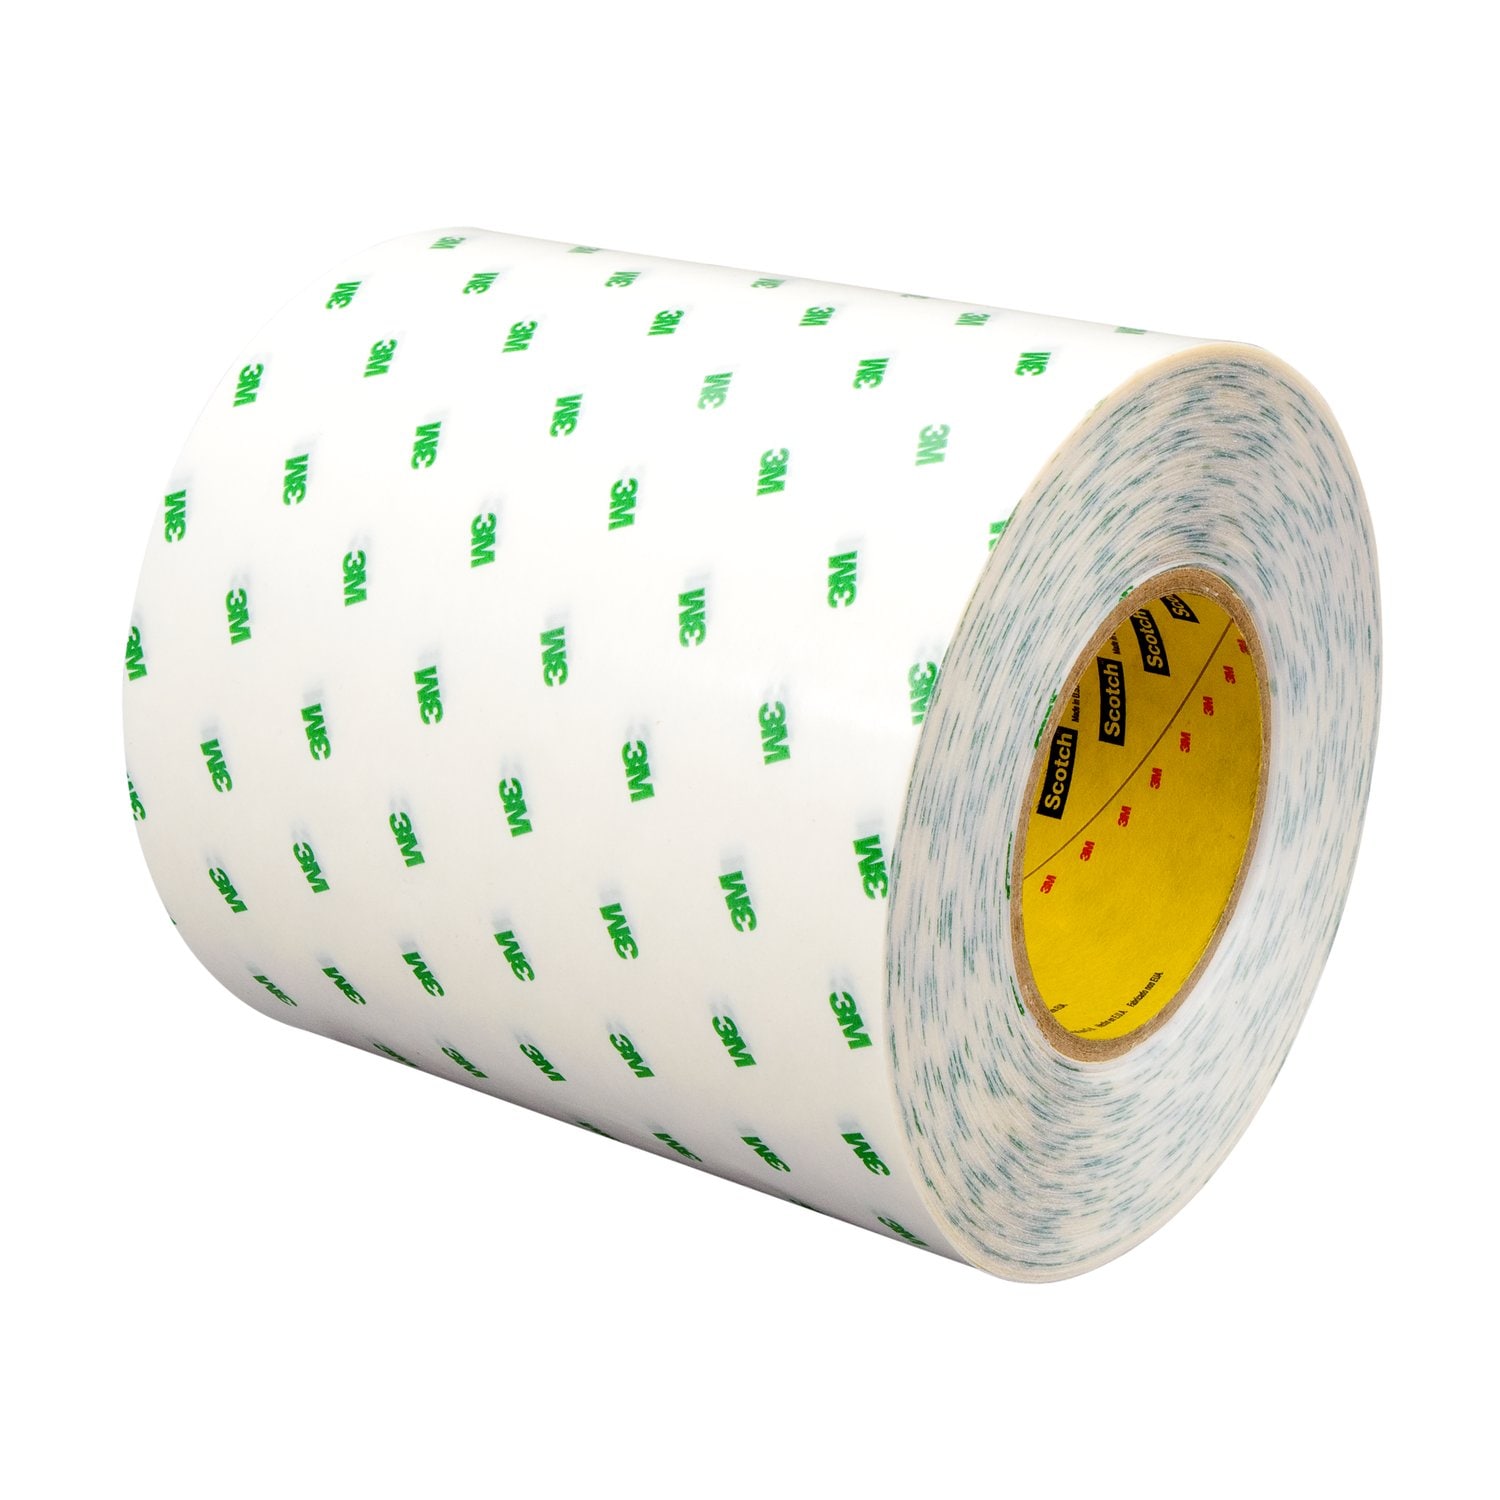 7100012442 - 3M Ultra High Temperature Adhesive Transfer Tape 9085, Clear, 5 mil,
Roll, Config